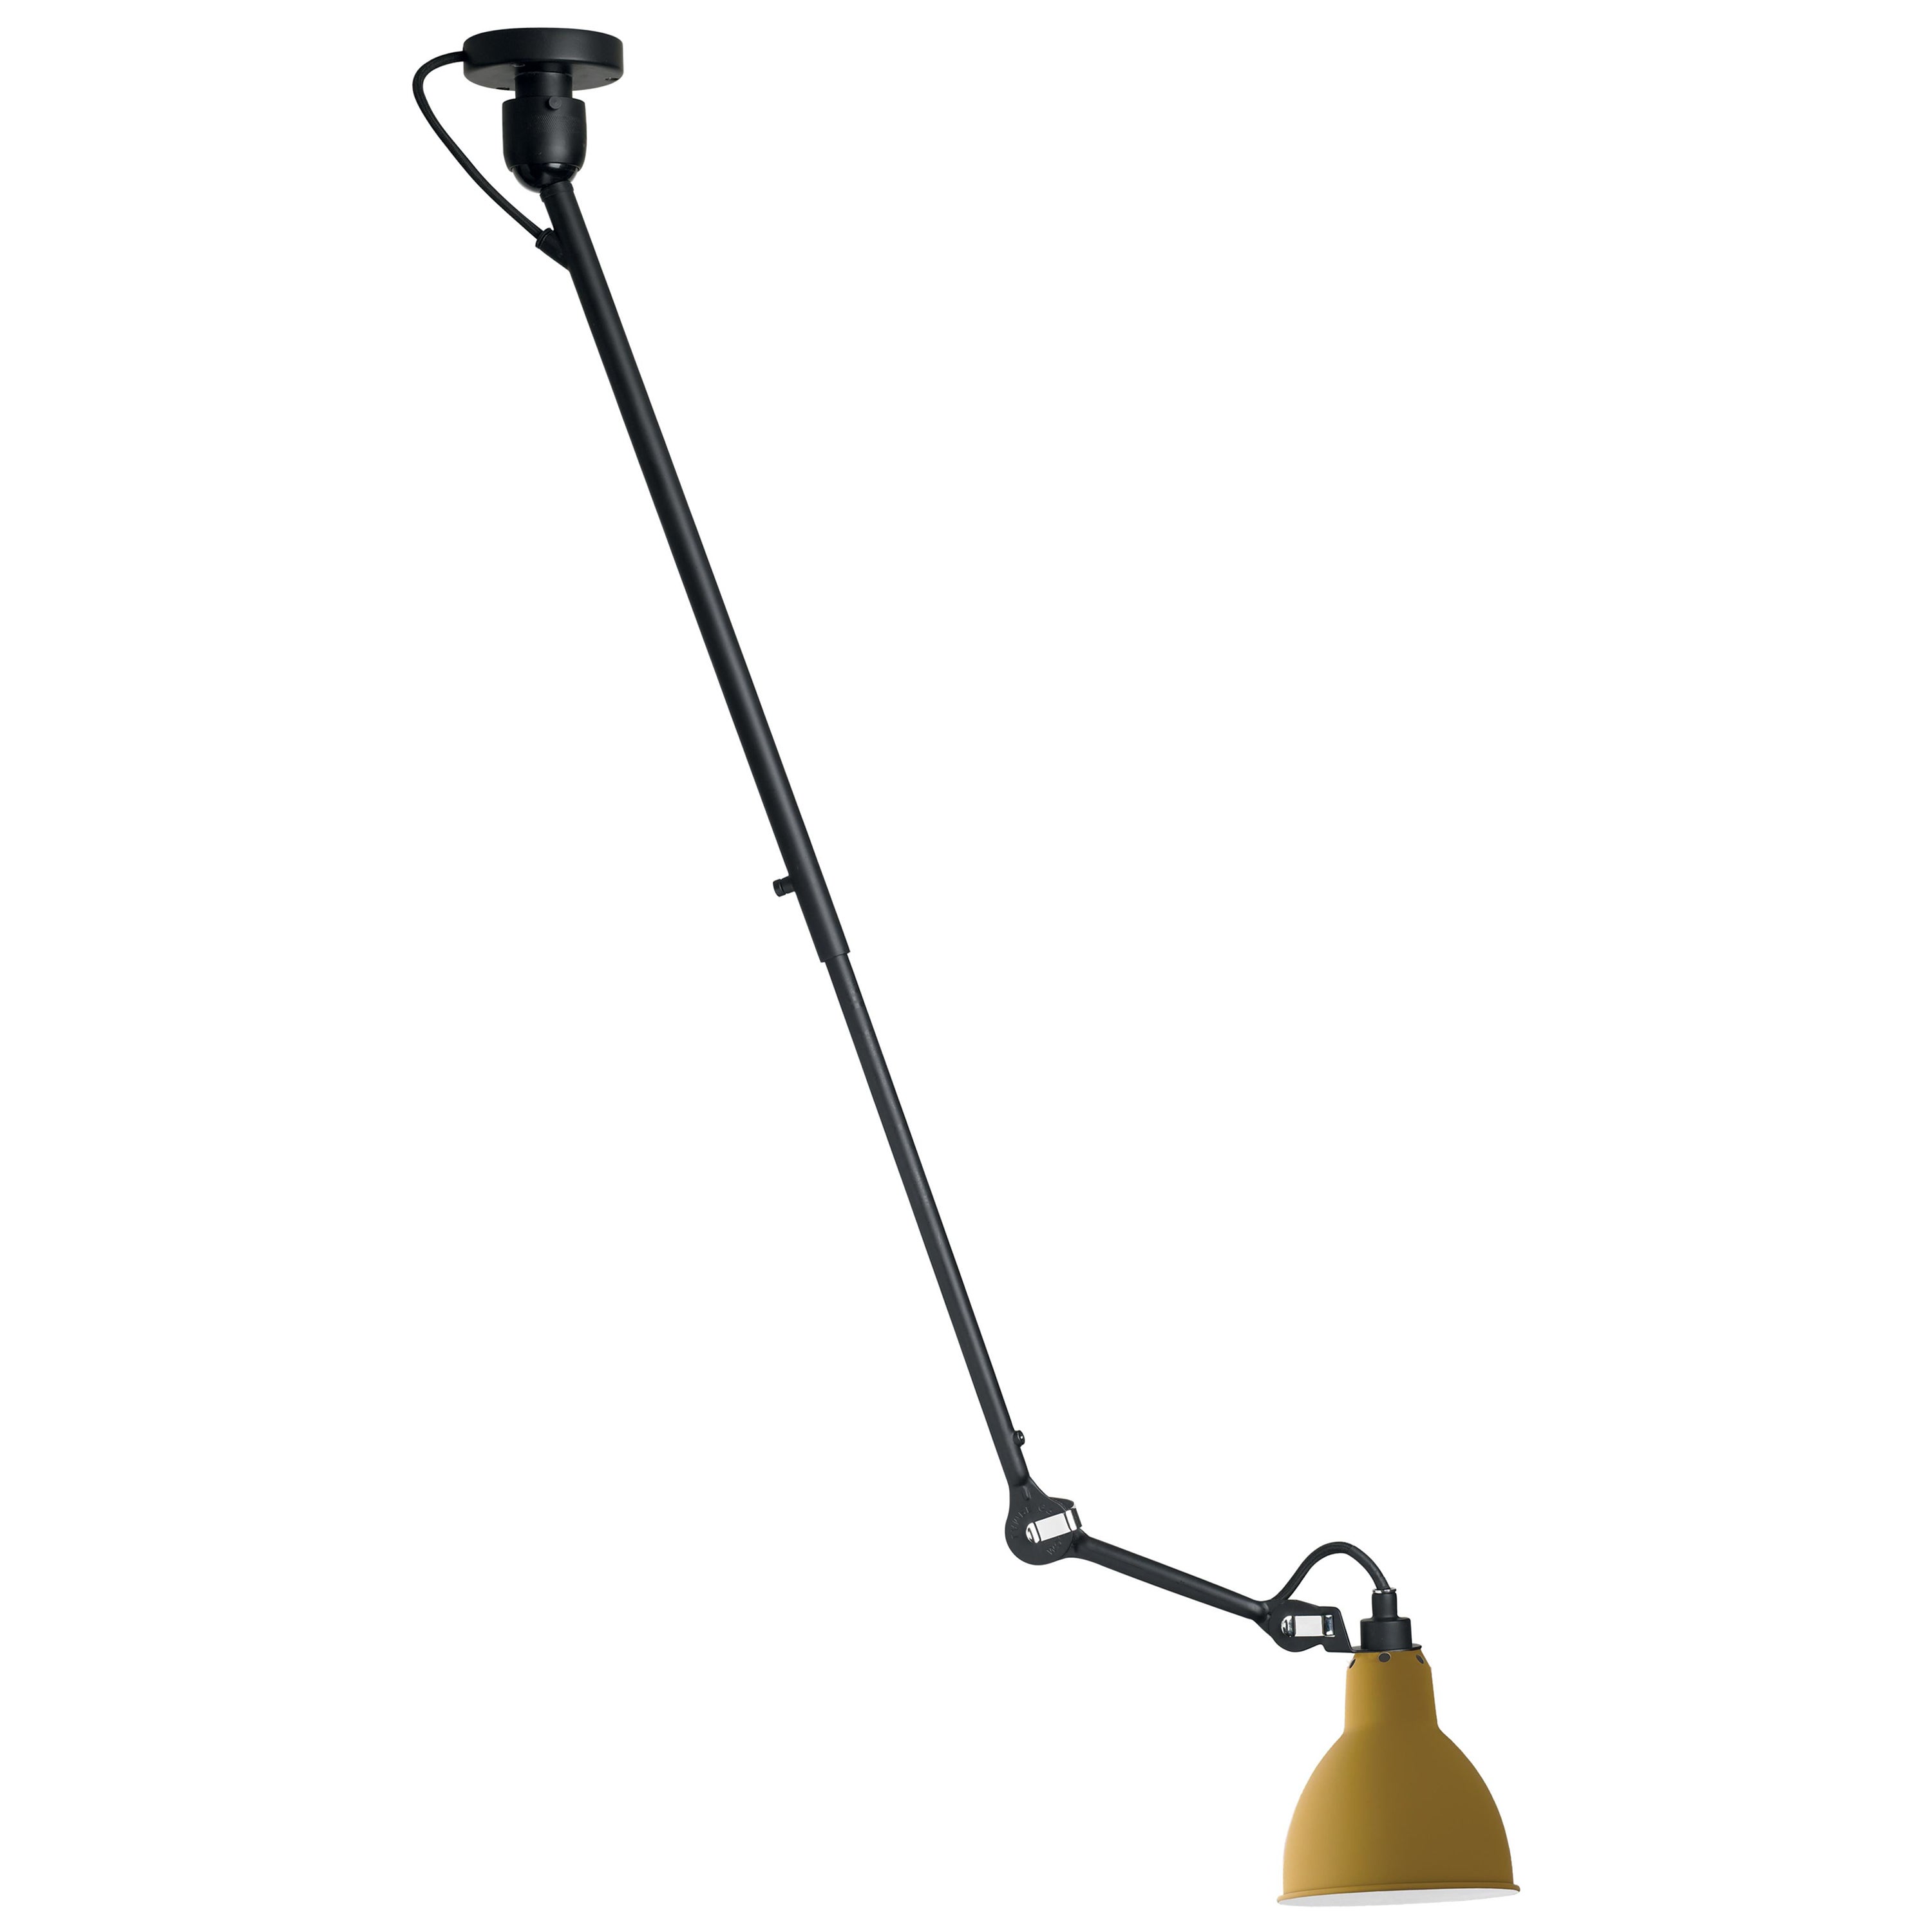 DCW Editions La Lampe Gras N°302 Pendant Light in Black Arm and Yellow Shade